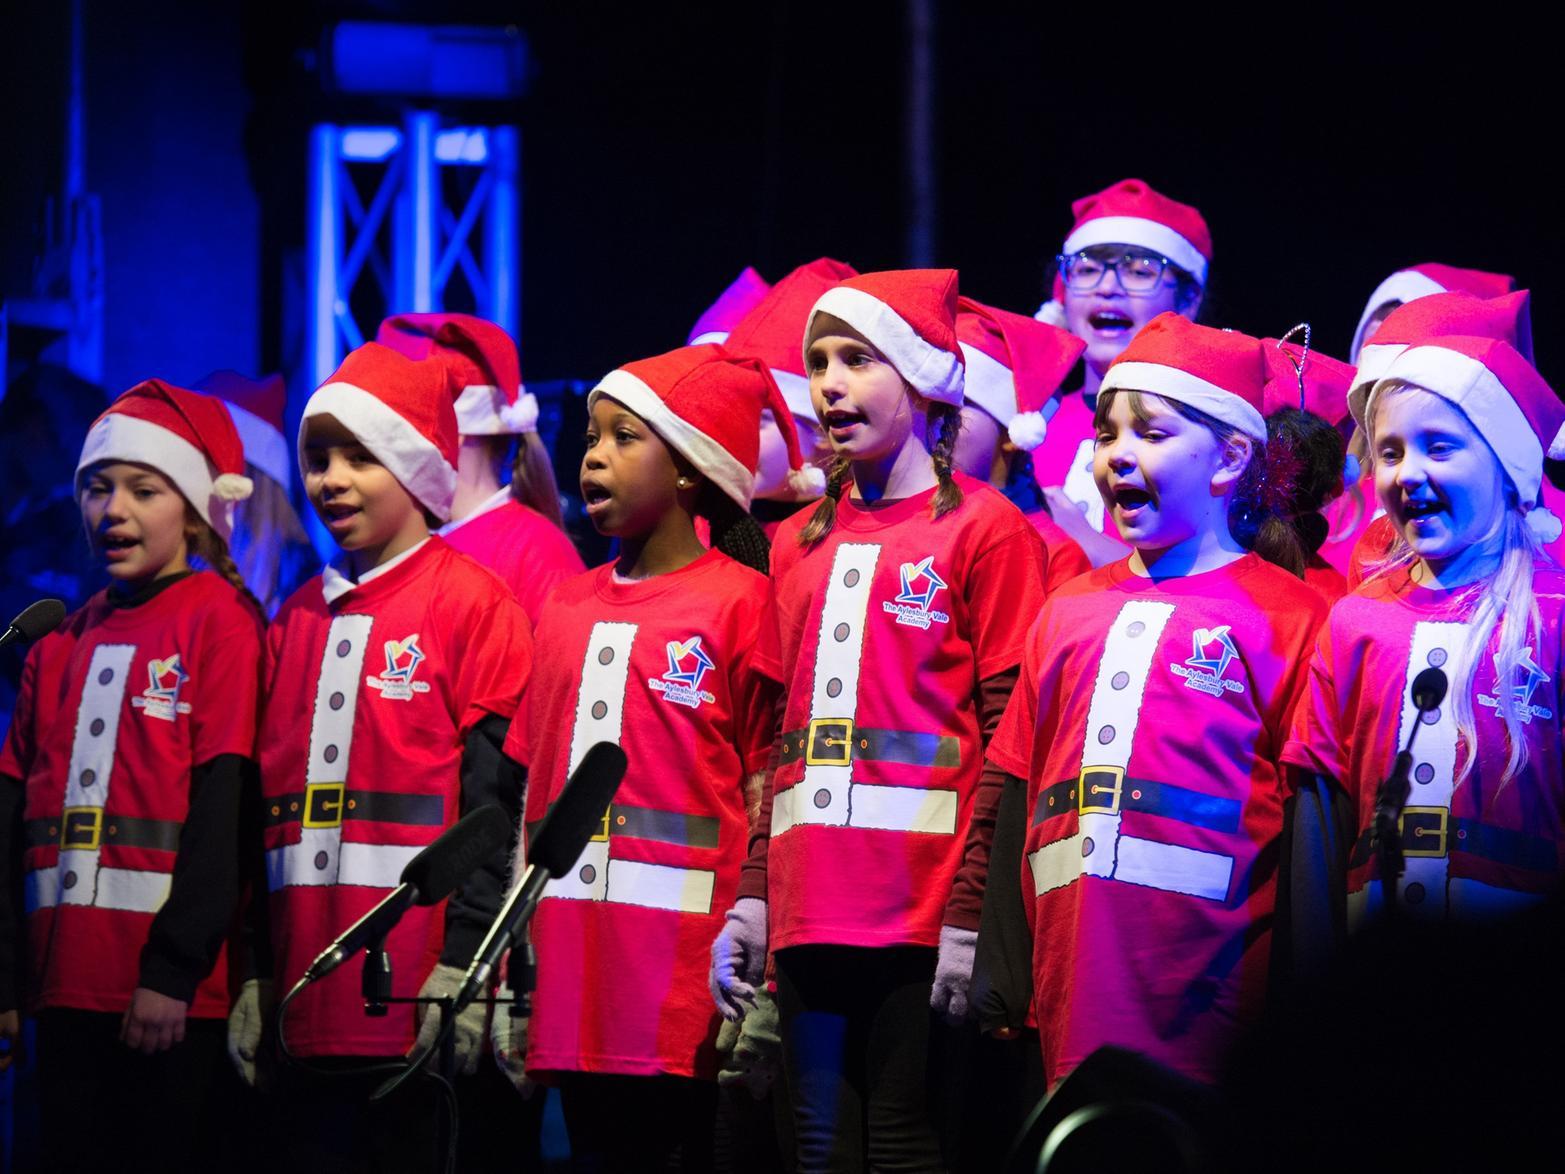 Aylesbury Vale Academy Primary Choir sang on the stage at the event